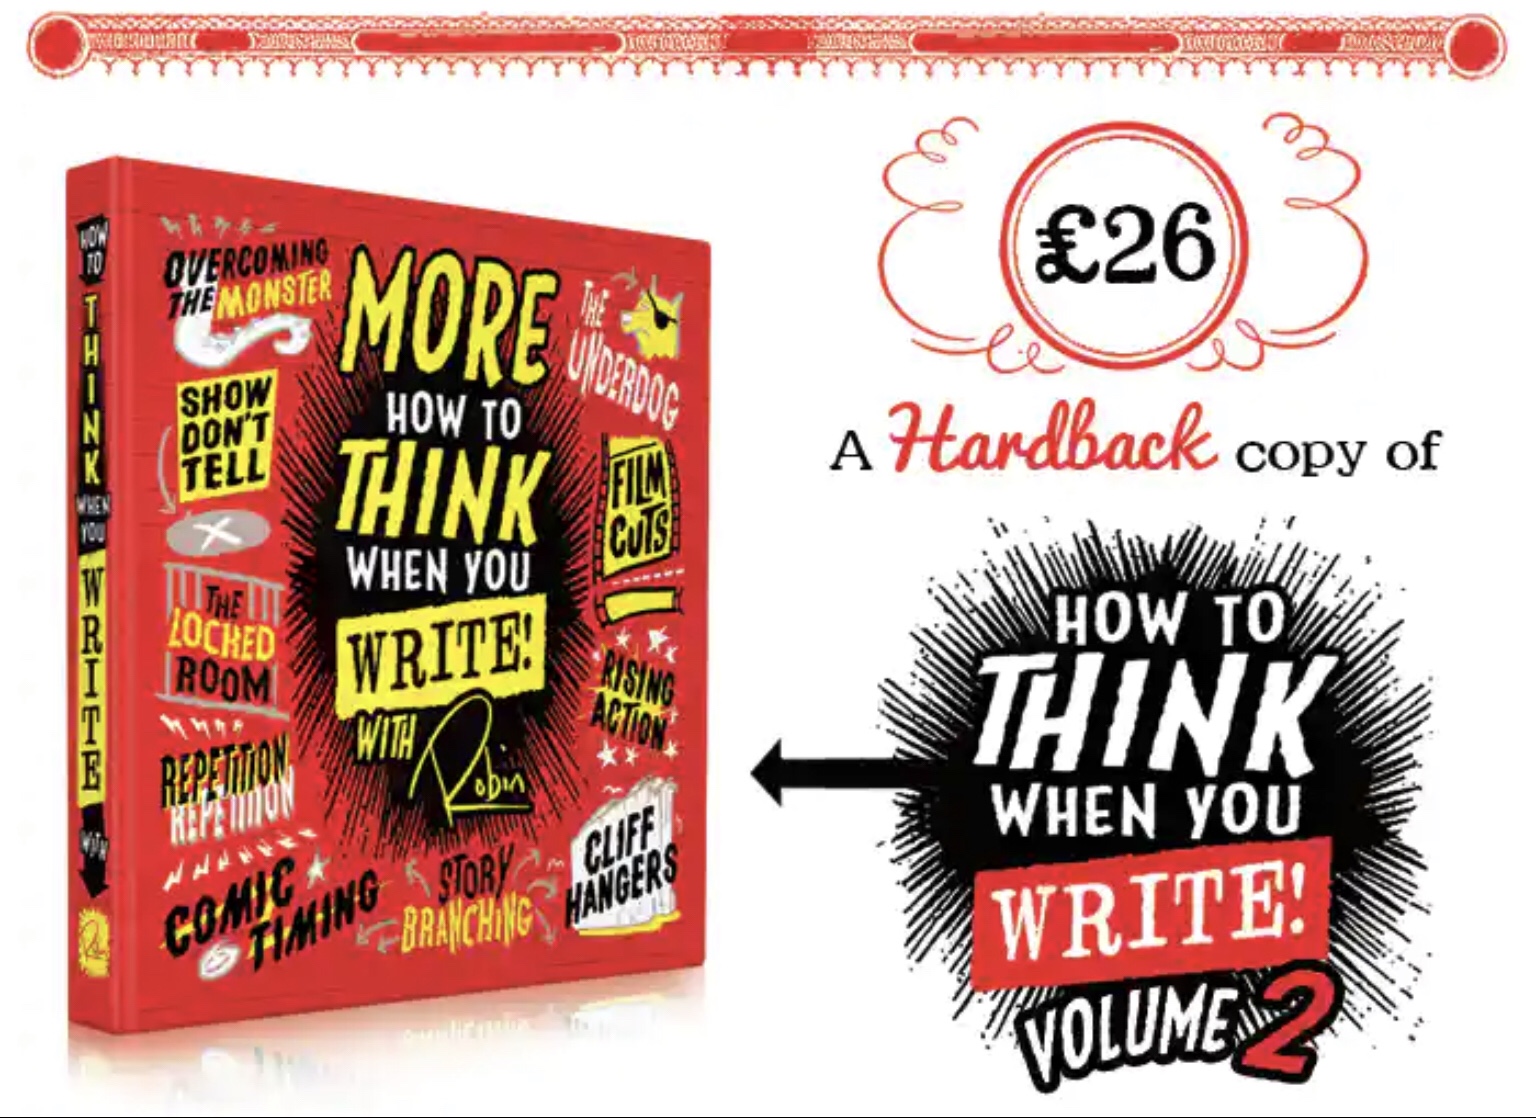 How to THINK when you WRITE Volume 2